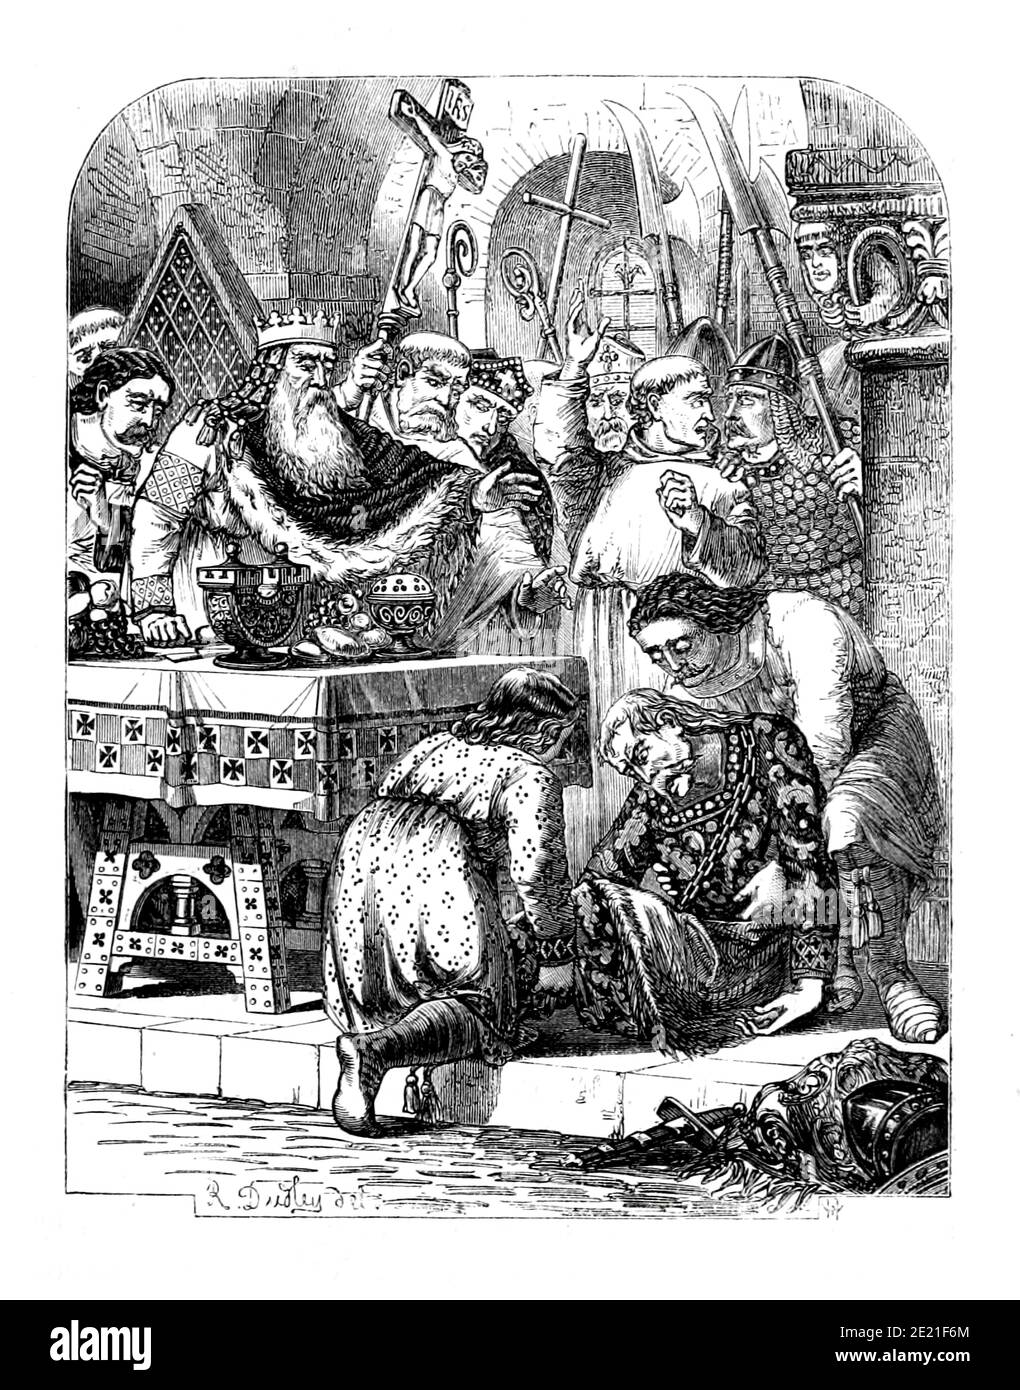 JUDGMENT OF GOD ON GODWIN [Godwin, Earl of Wessex] From the Book 'Danes, Saxons and Normans : or, Stories of our ancestors' by Edgar, J. G. (John George), 1834-1864 Published in London in 1863 Stock Photo